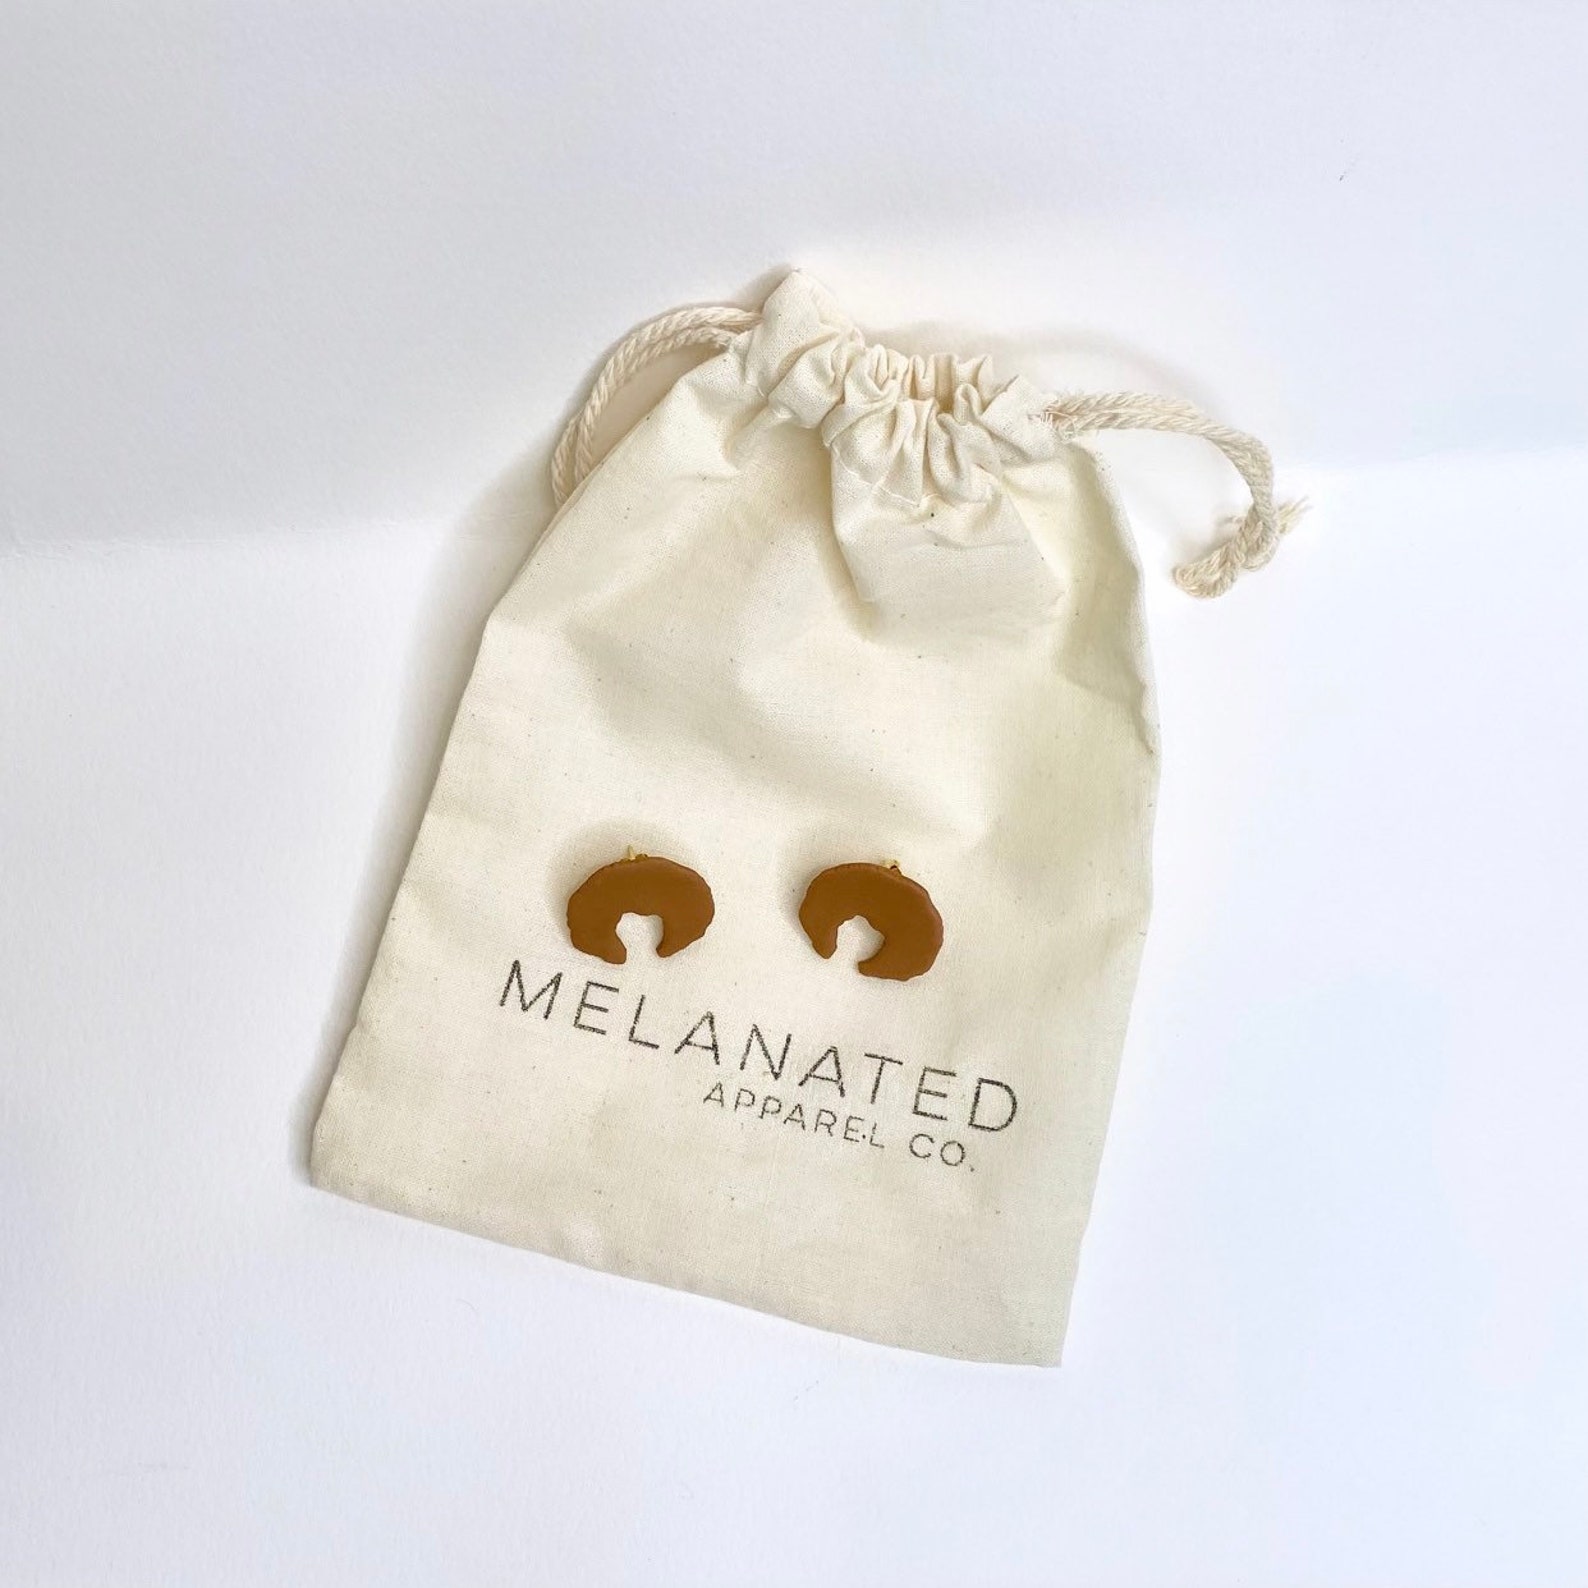 Handmade Afro Studs from Melanated on Etsy: Wonderful gifts under $15